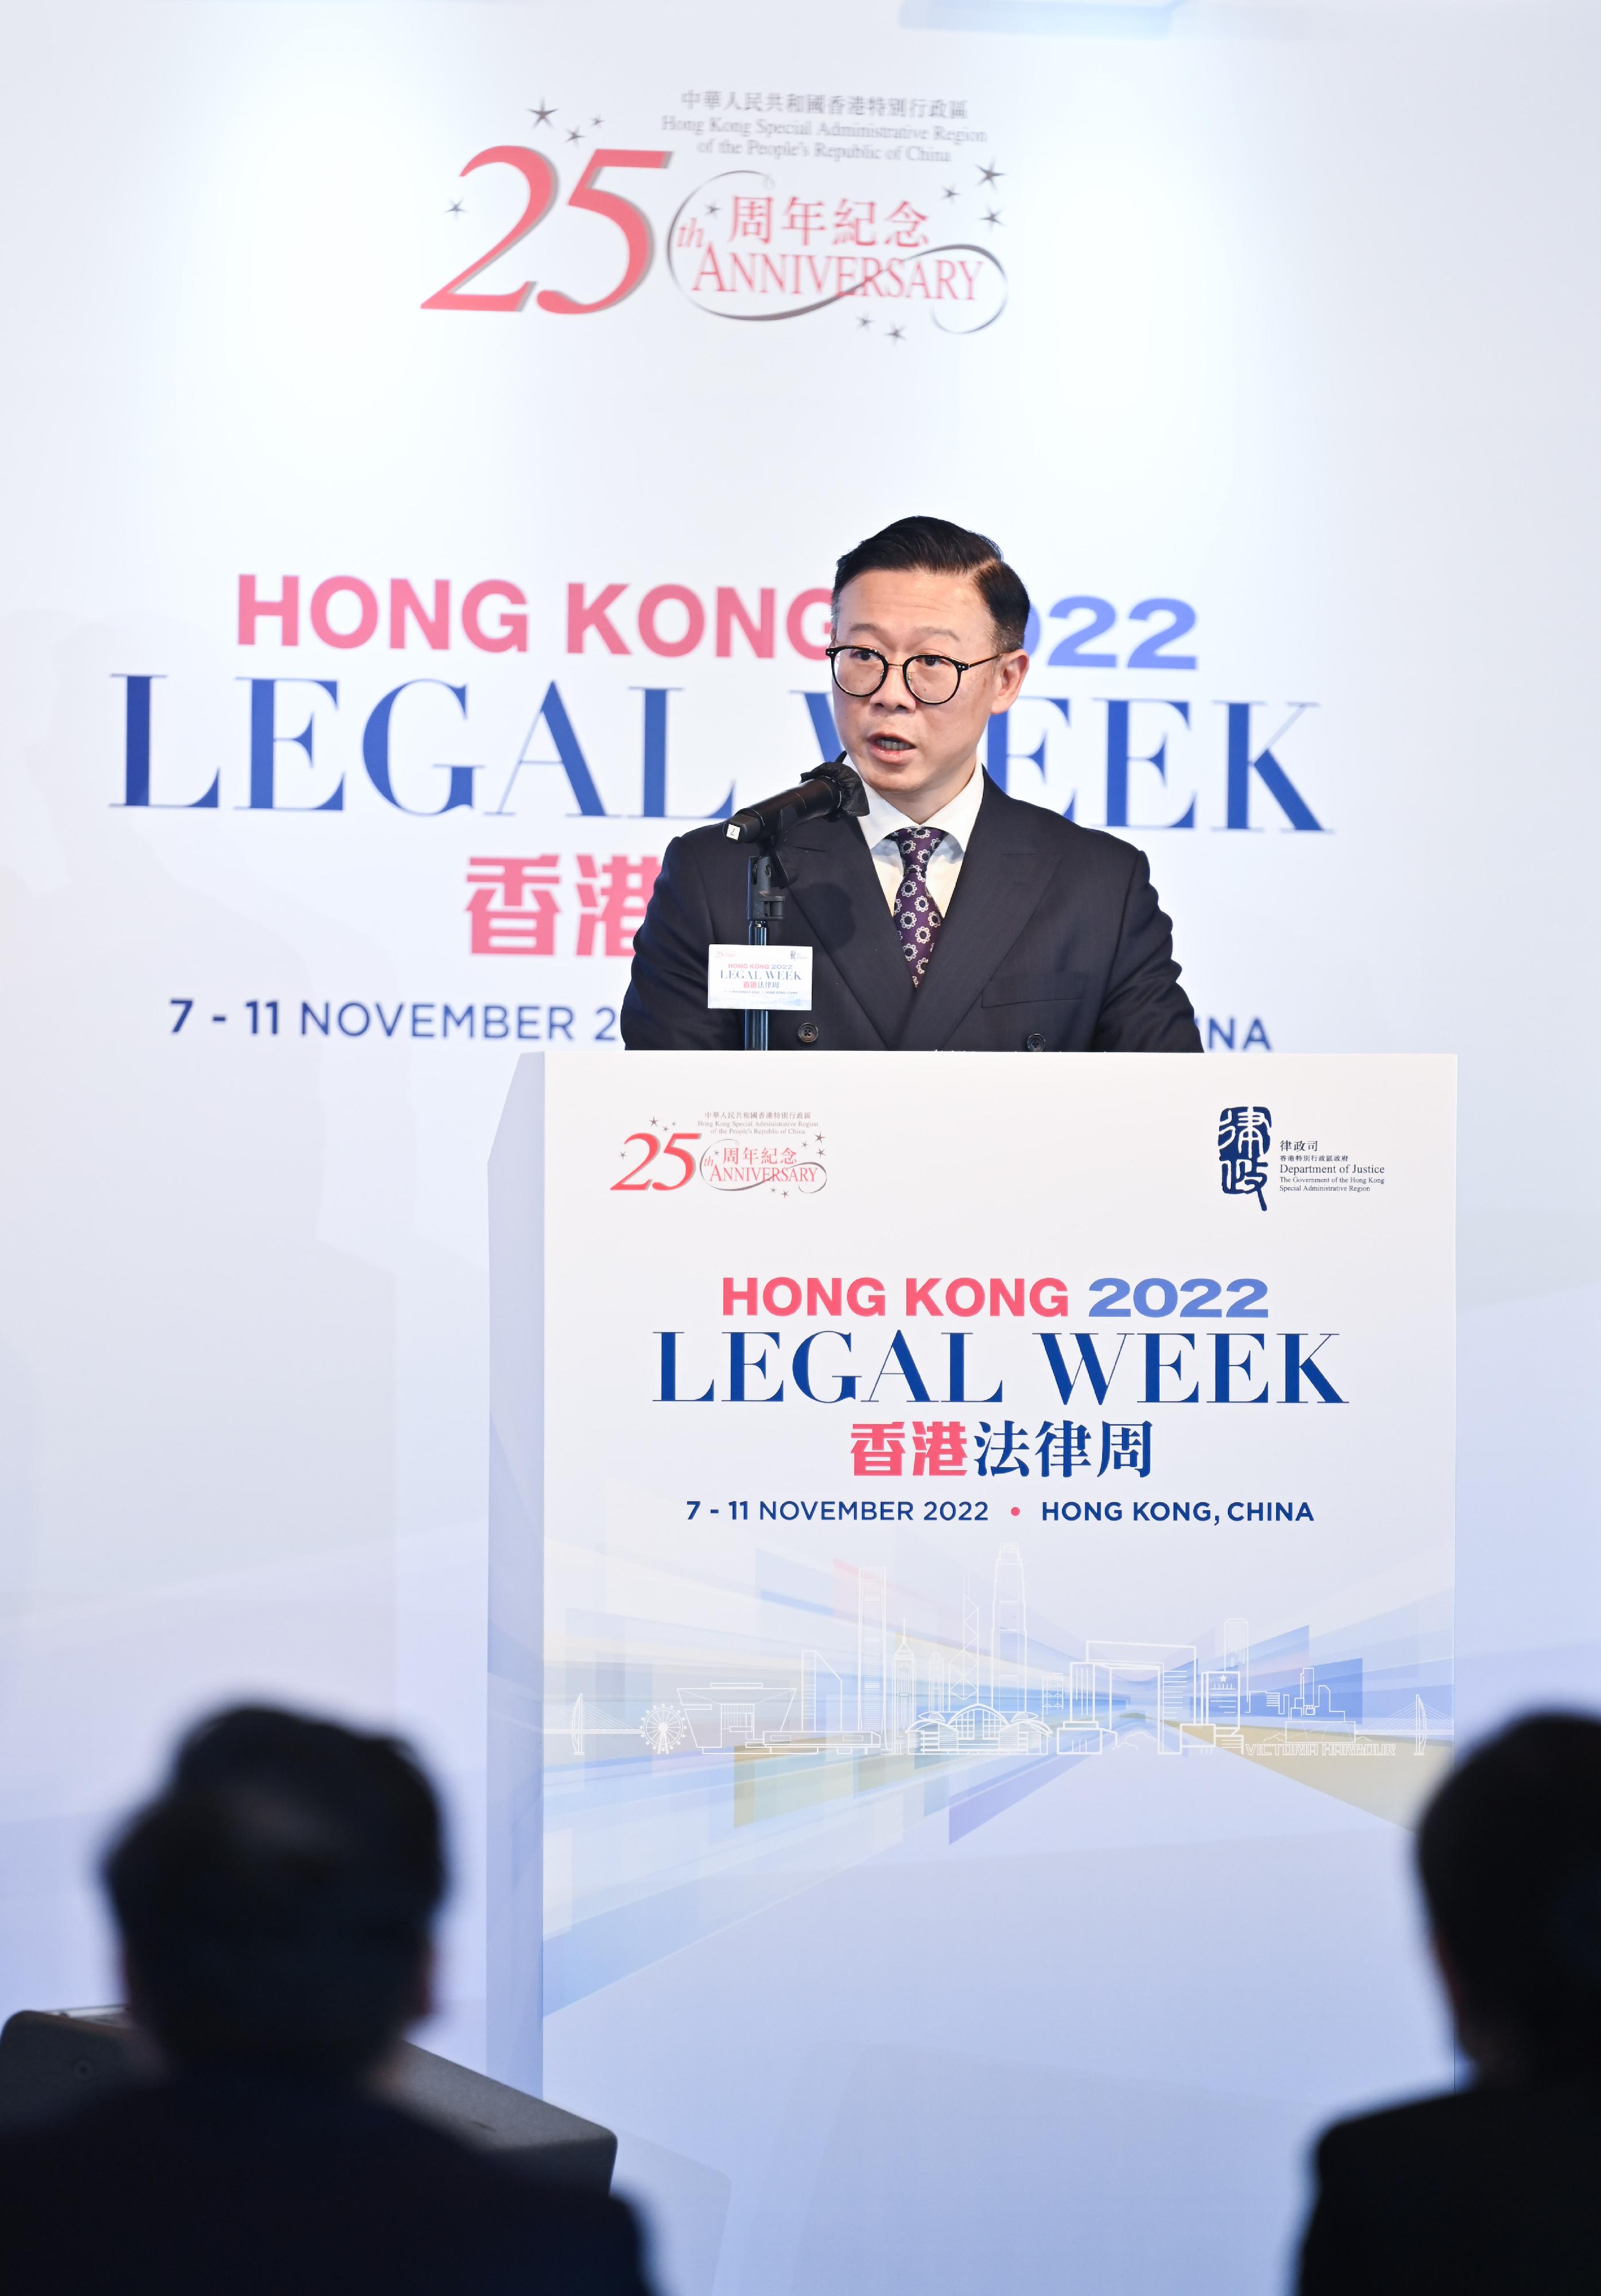 The Deputy Secretary for Justice, Mr Cheung Kwok-kwan, speaks at the opening of the Generations in Arbitration Conference under Hong Kong Legal Week 2022 today (November 8).